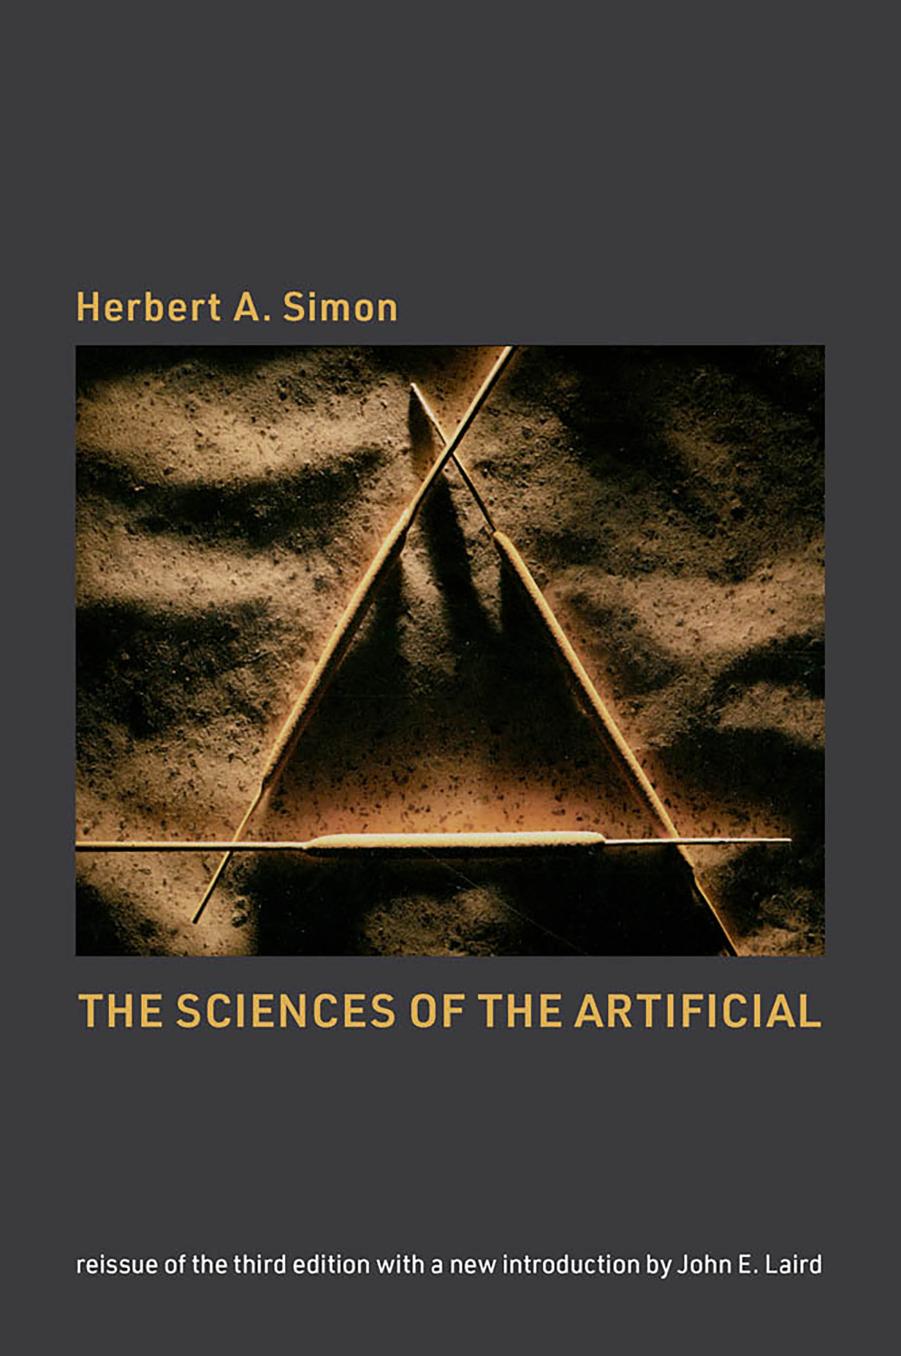 The Sciences of the Artificial by Herbert A. Simon